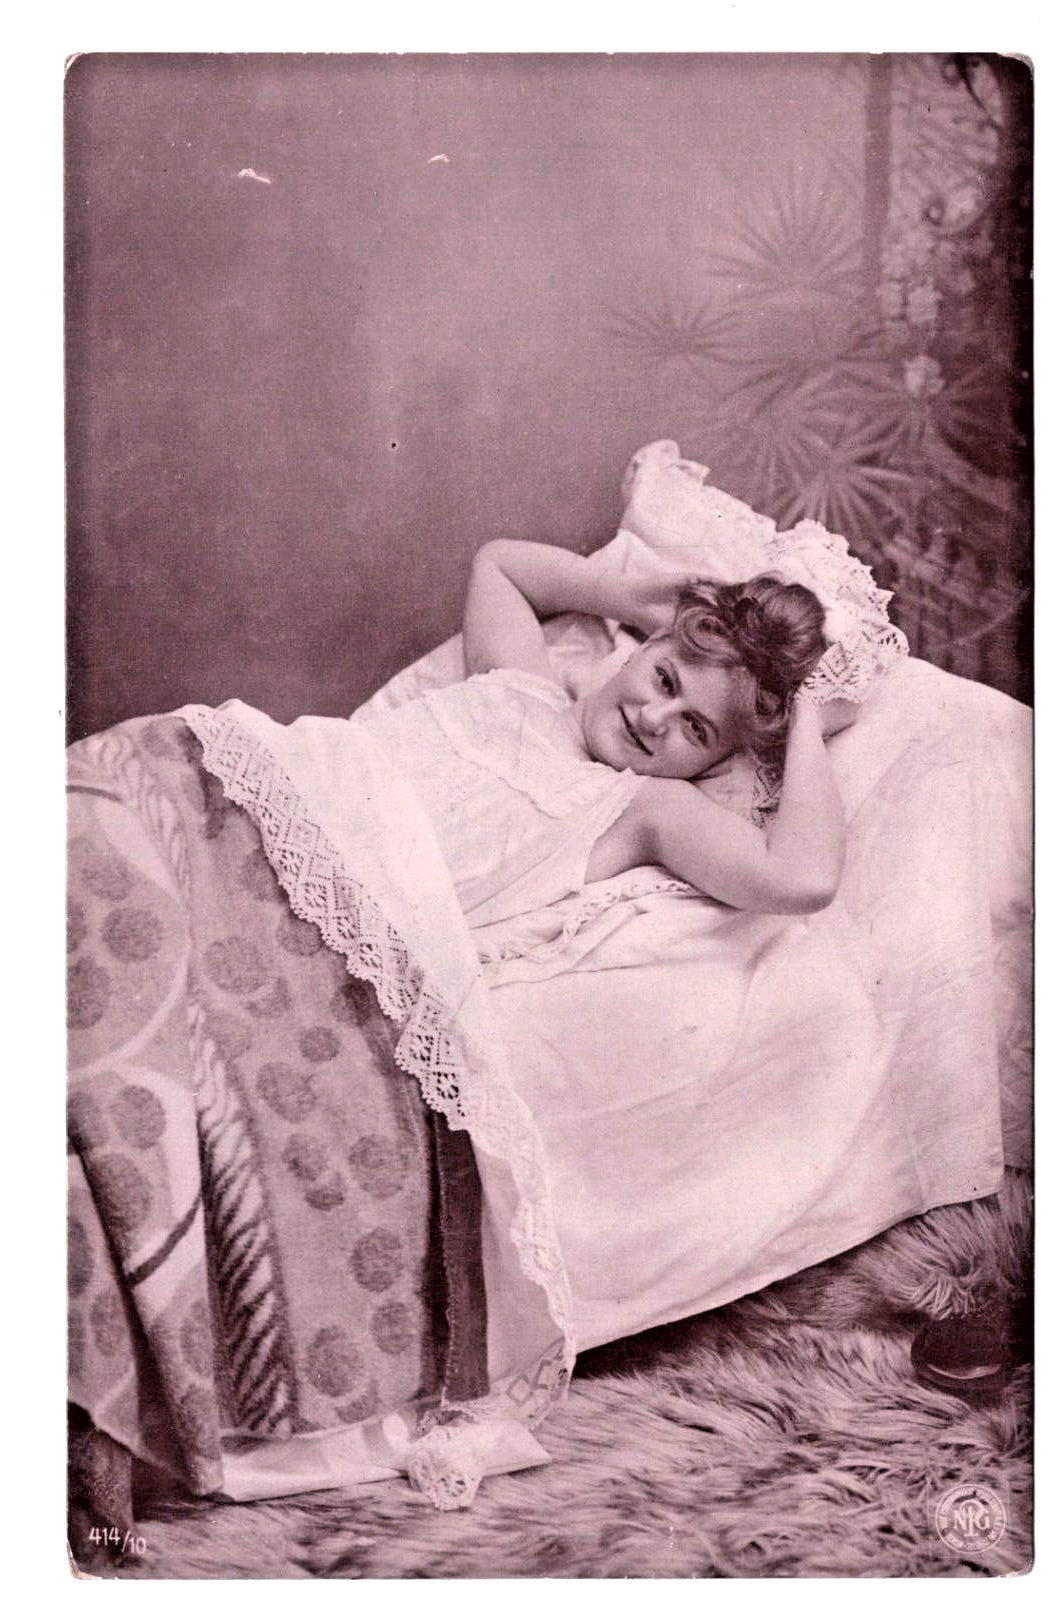 Victorian Pretty Woman in Bed Pose Lace Sheets Fur Rug RPPC Real Photo Postcard